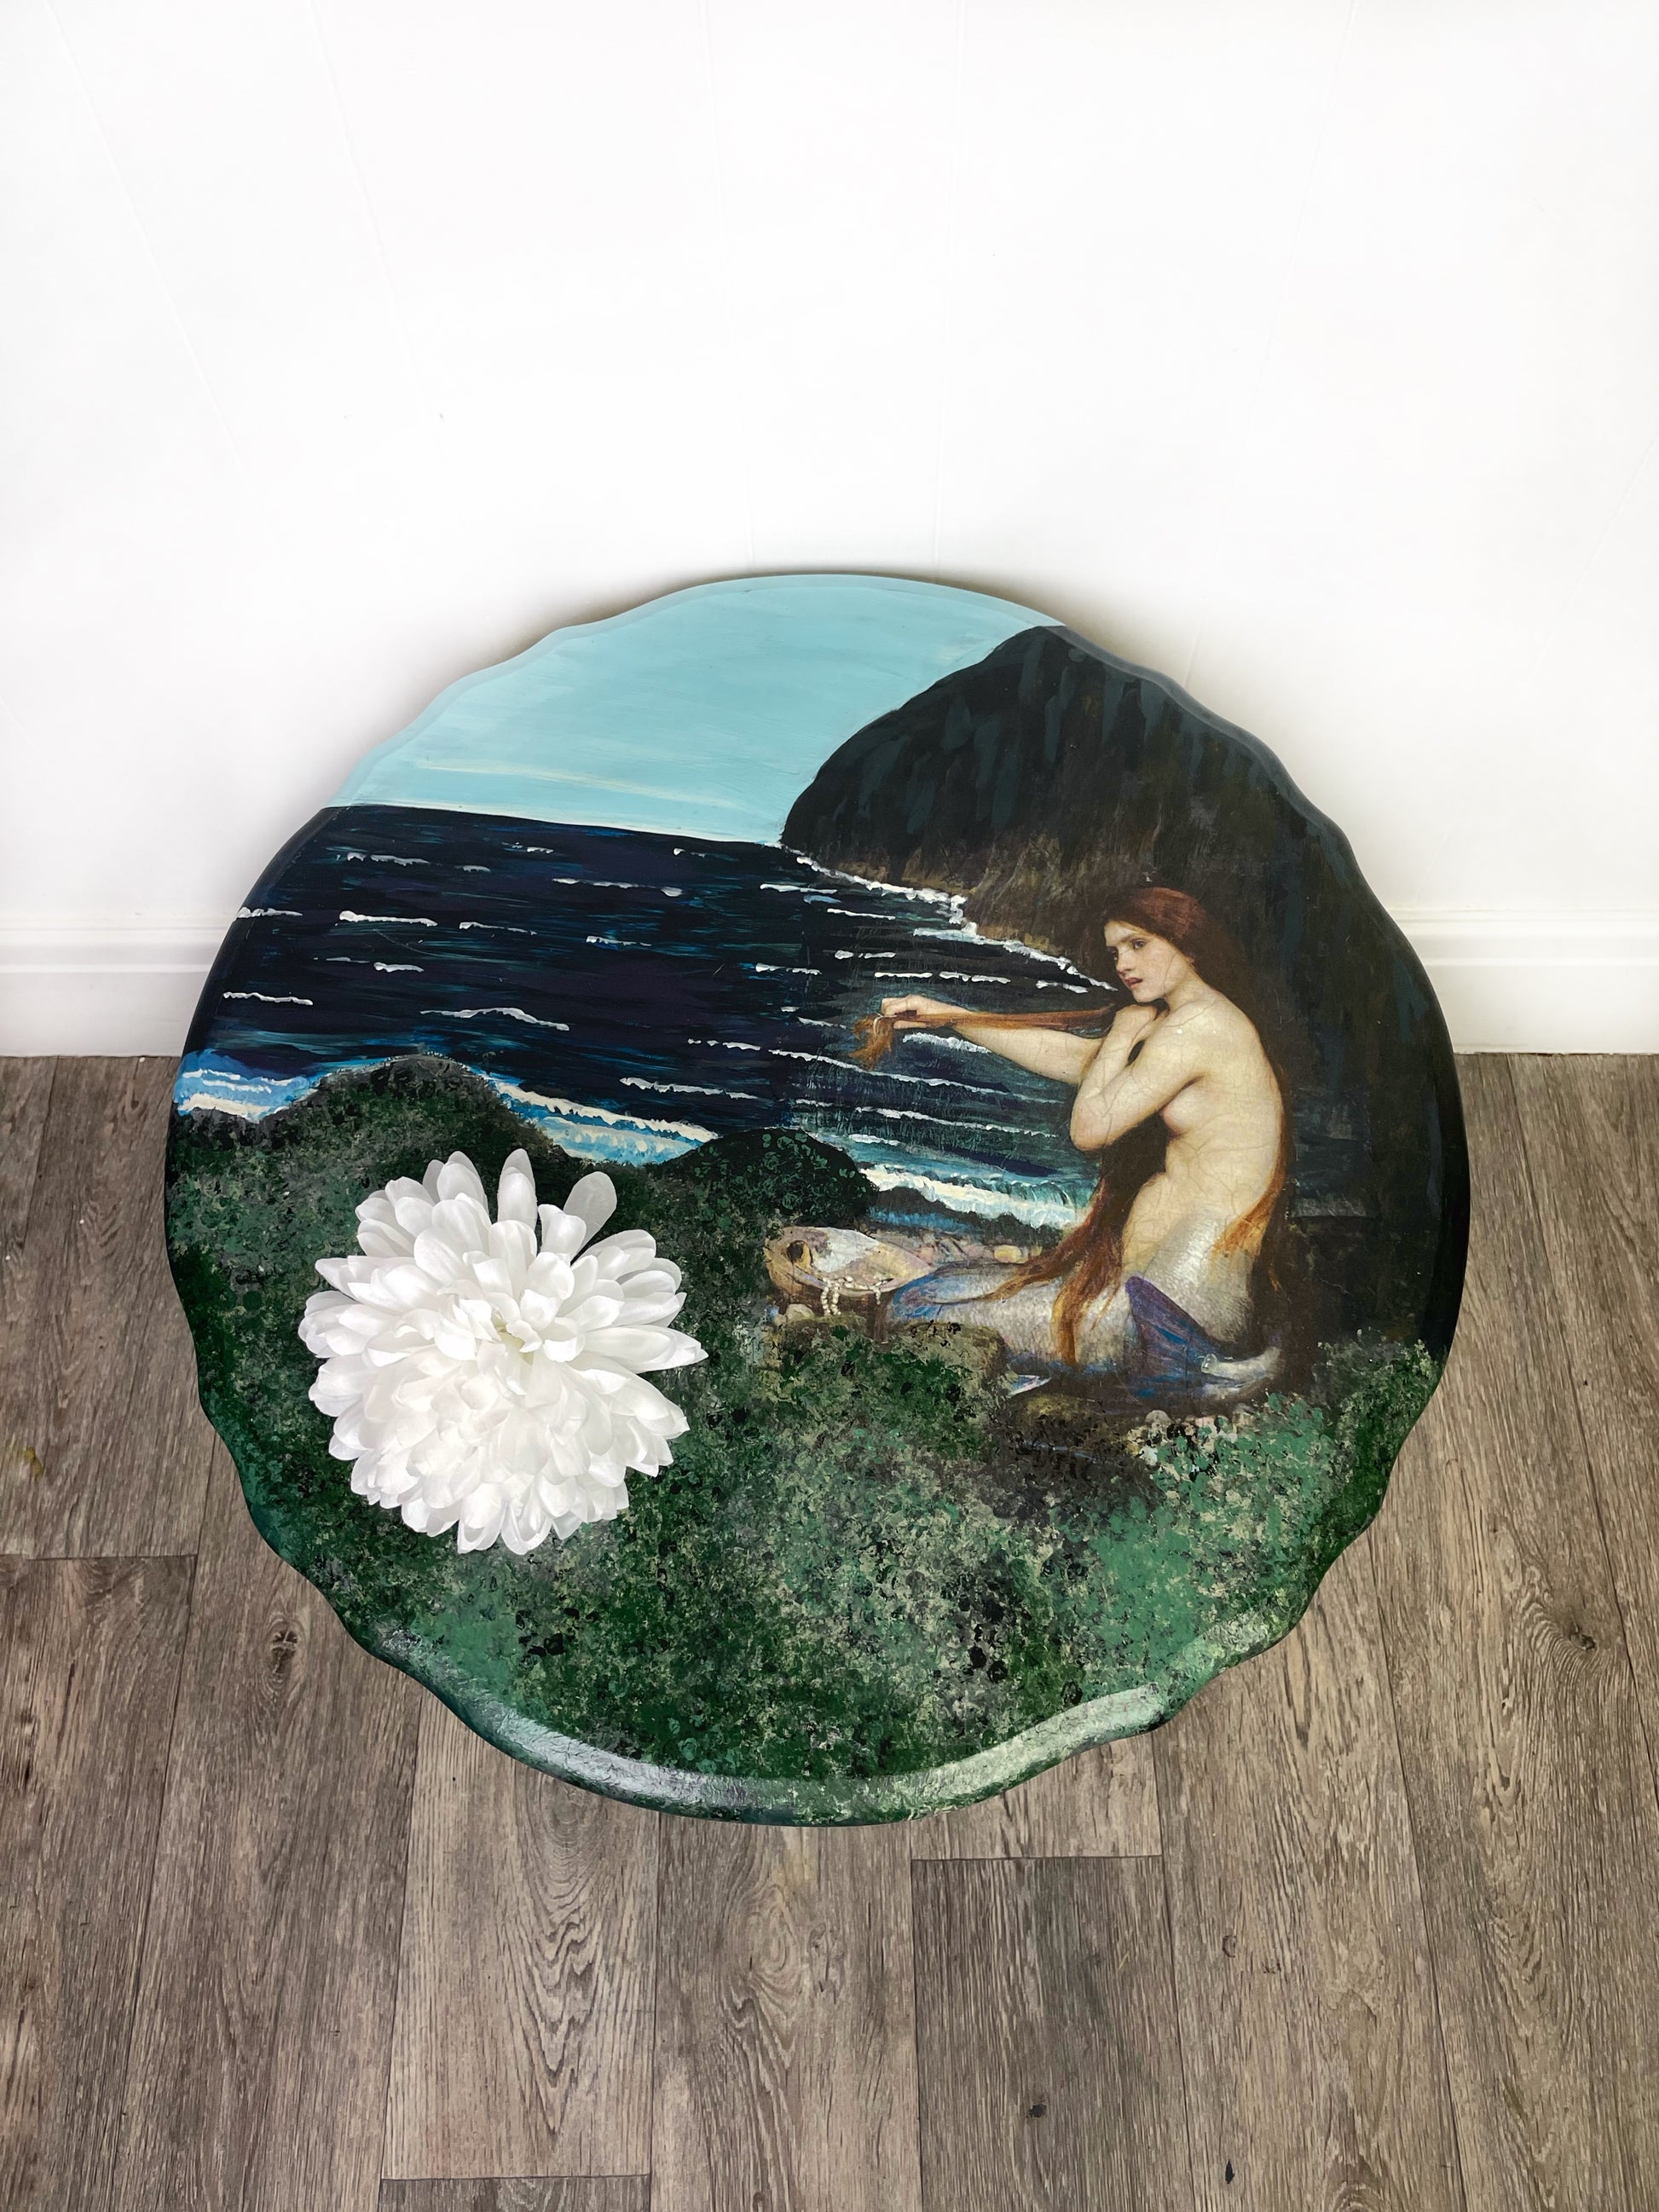 Mermaid Design Coffee Table. Accent Table, Restyled Vintage Side Table - Unique Home Pieces